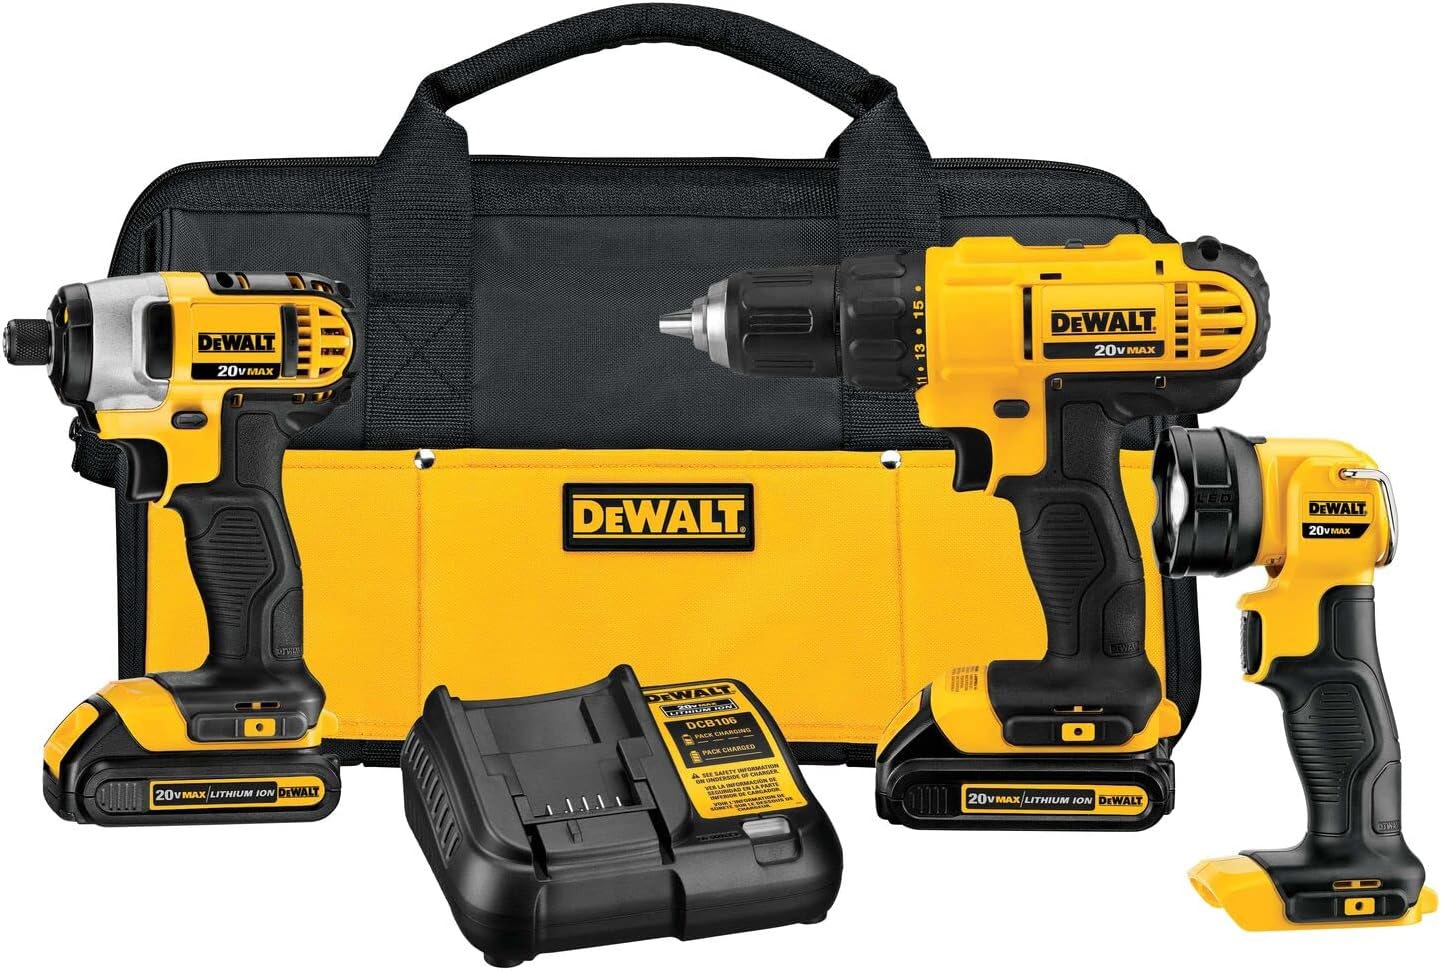 Dewalt 20v Max Cordless Drill Combo Kit, 3-Tool, Battery And Charger Included